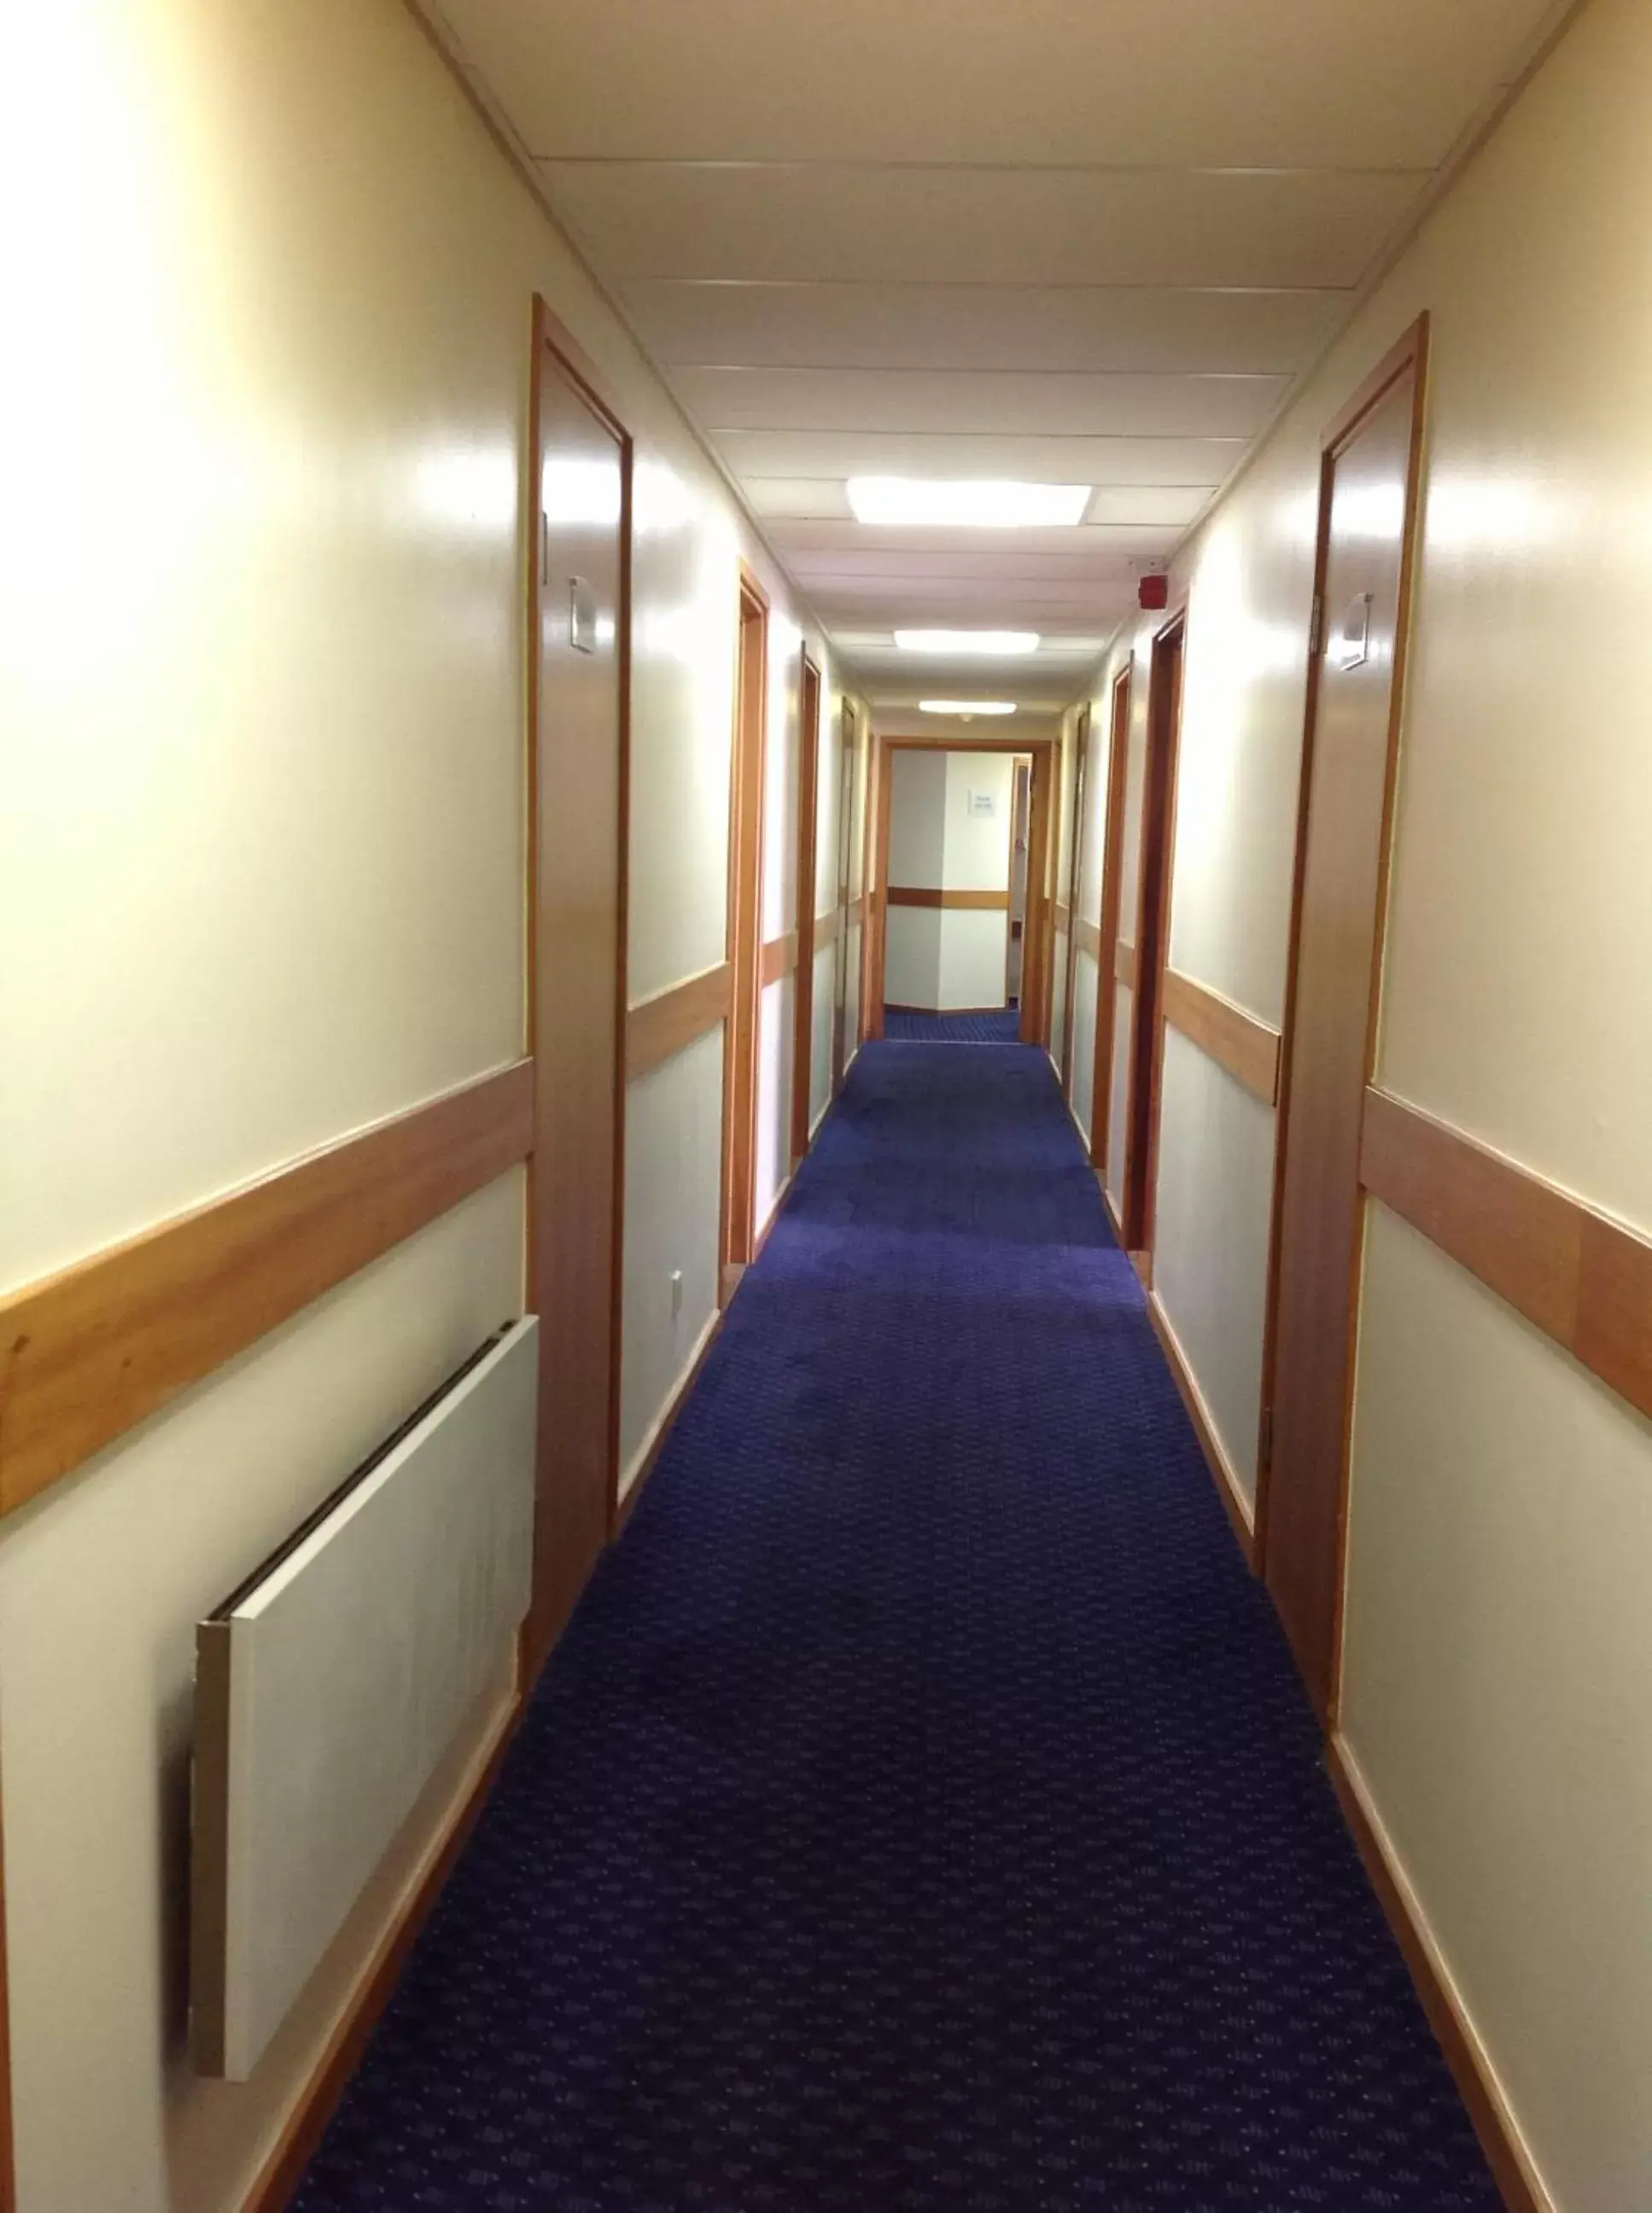 Area and facilities in Days Inn Magor